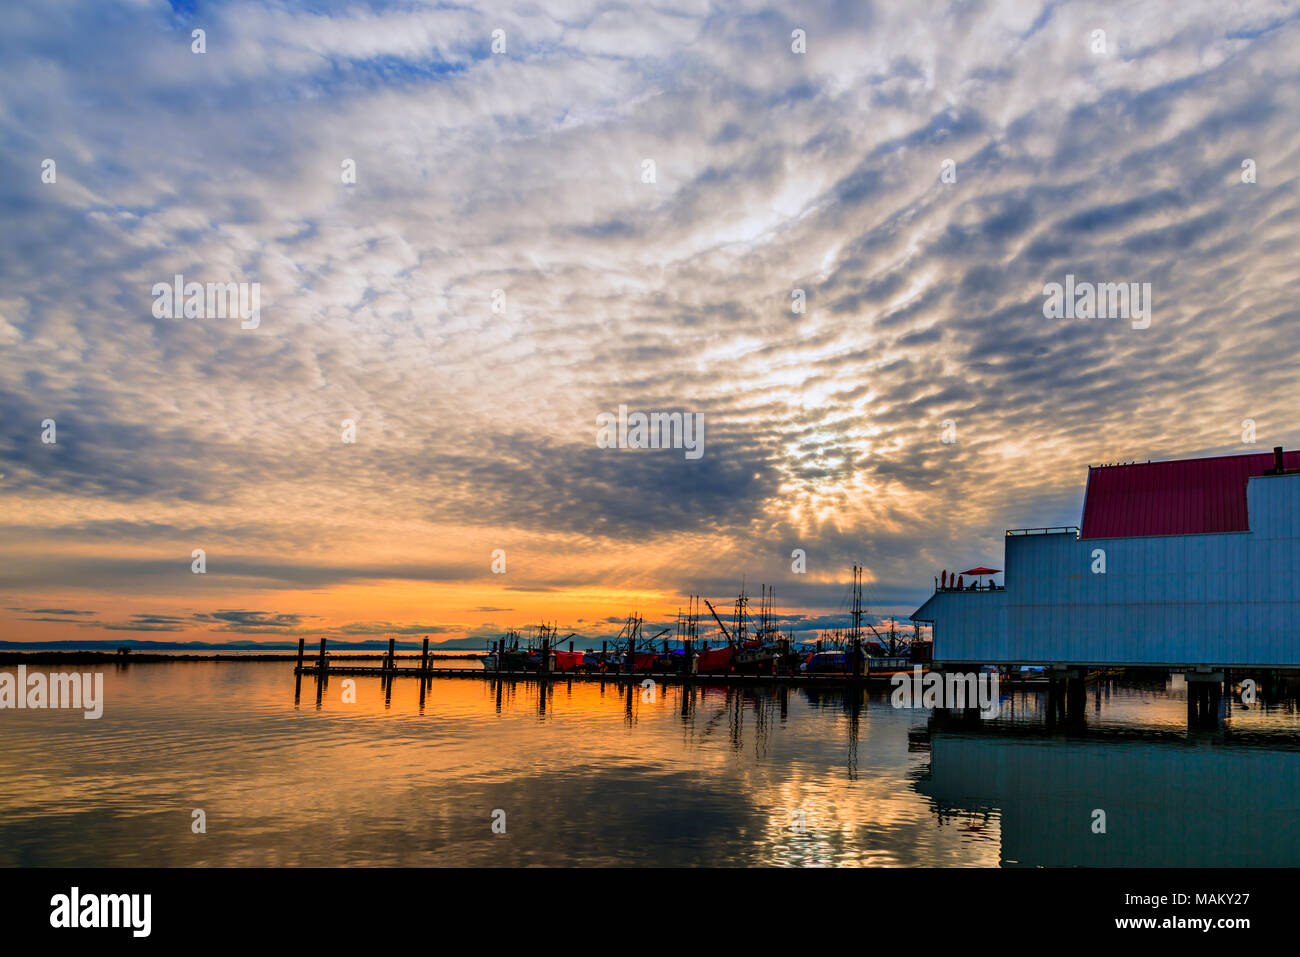 Sunset on the river near the pier of fishing ships with reflection in the water, huge cloudy sky and silhouettes of people under a canopy in a cafe Stock Photo